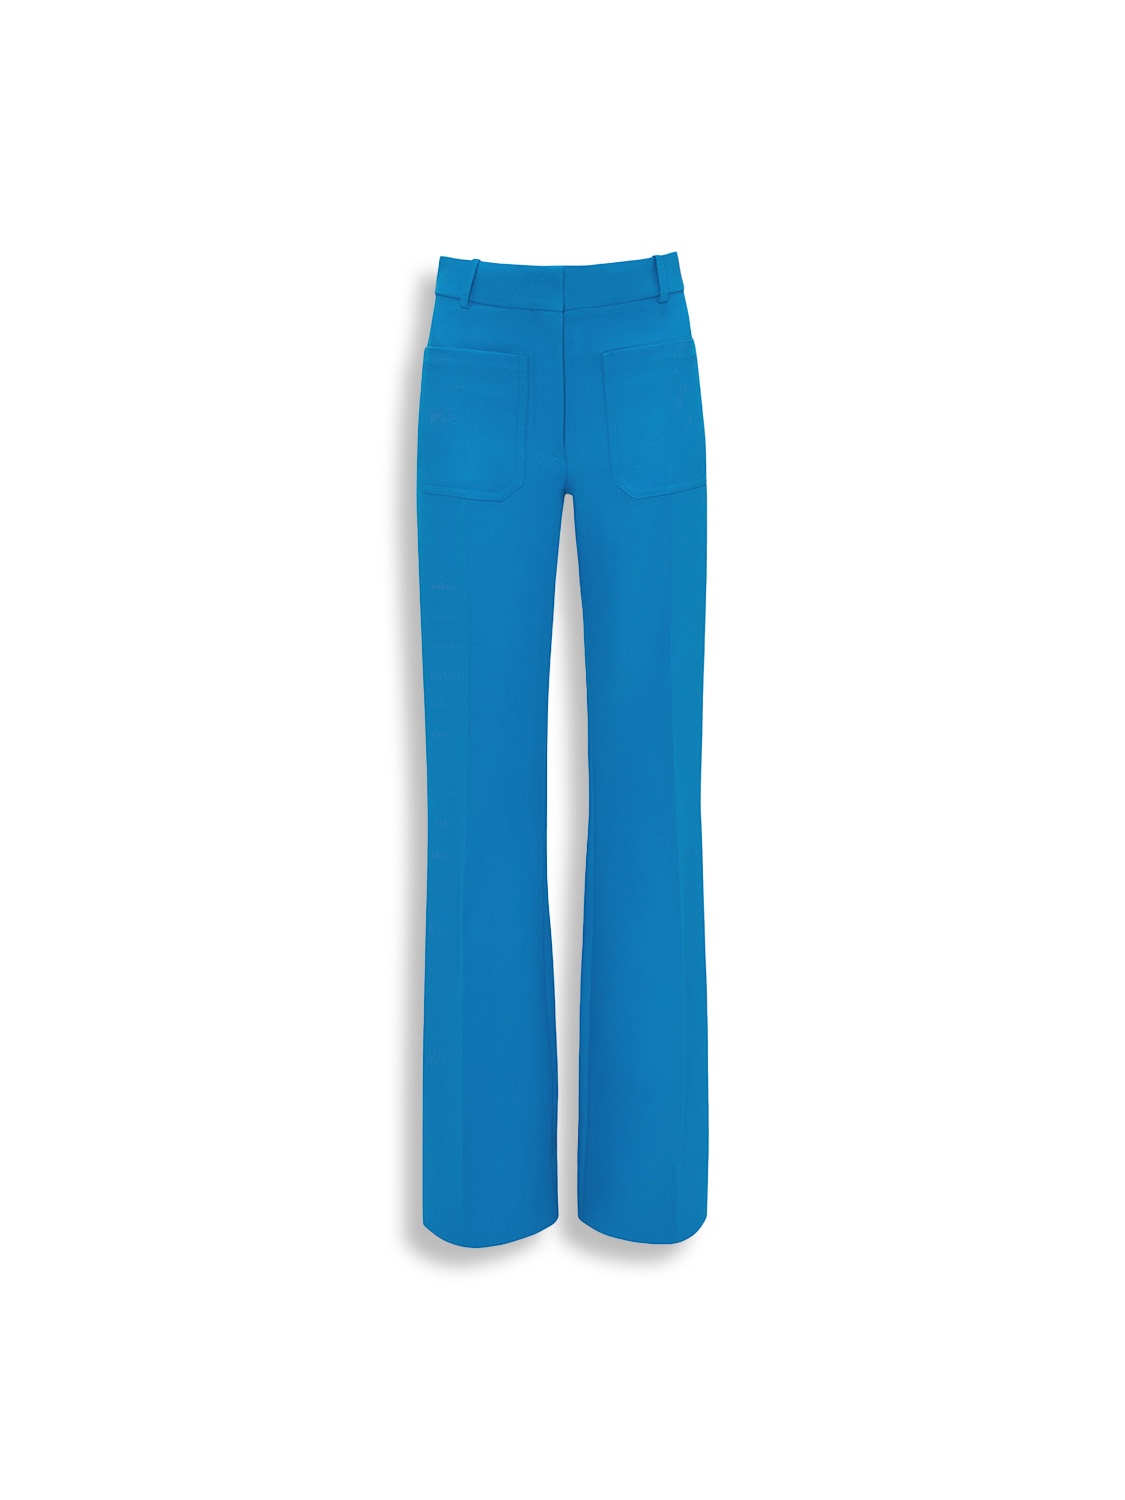 Victoria Beckham Alina Tailored Trousers - Trousers with patch pockets with wide leg blue 36